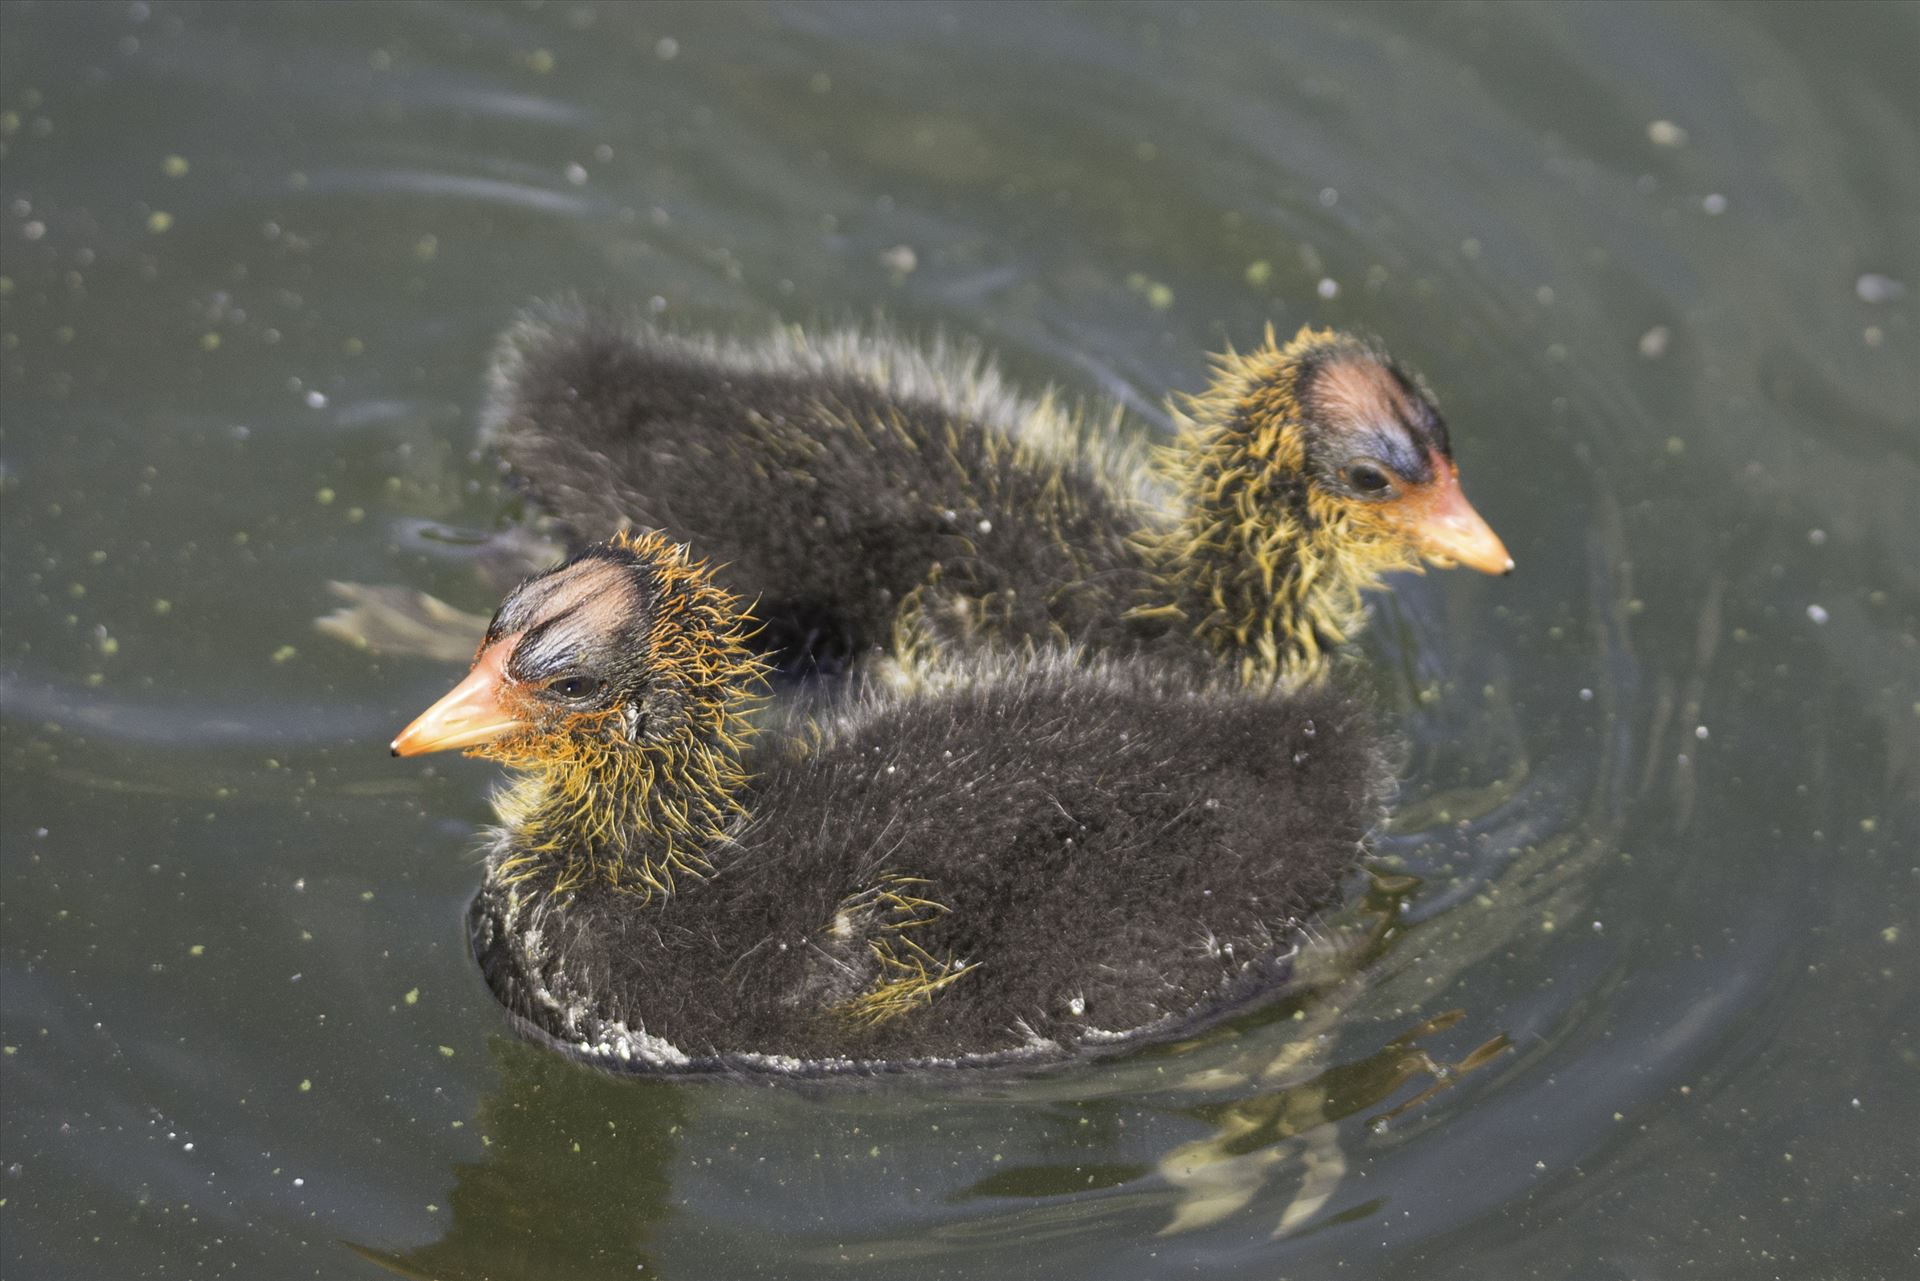 Coot Chicks Two American Coot Chicks, just a few days old, swim in Newark Lake by Denise Buckley Crawford